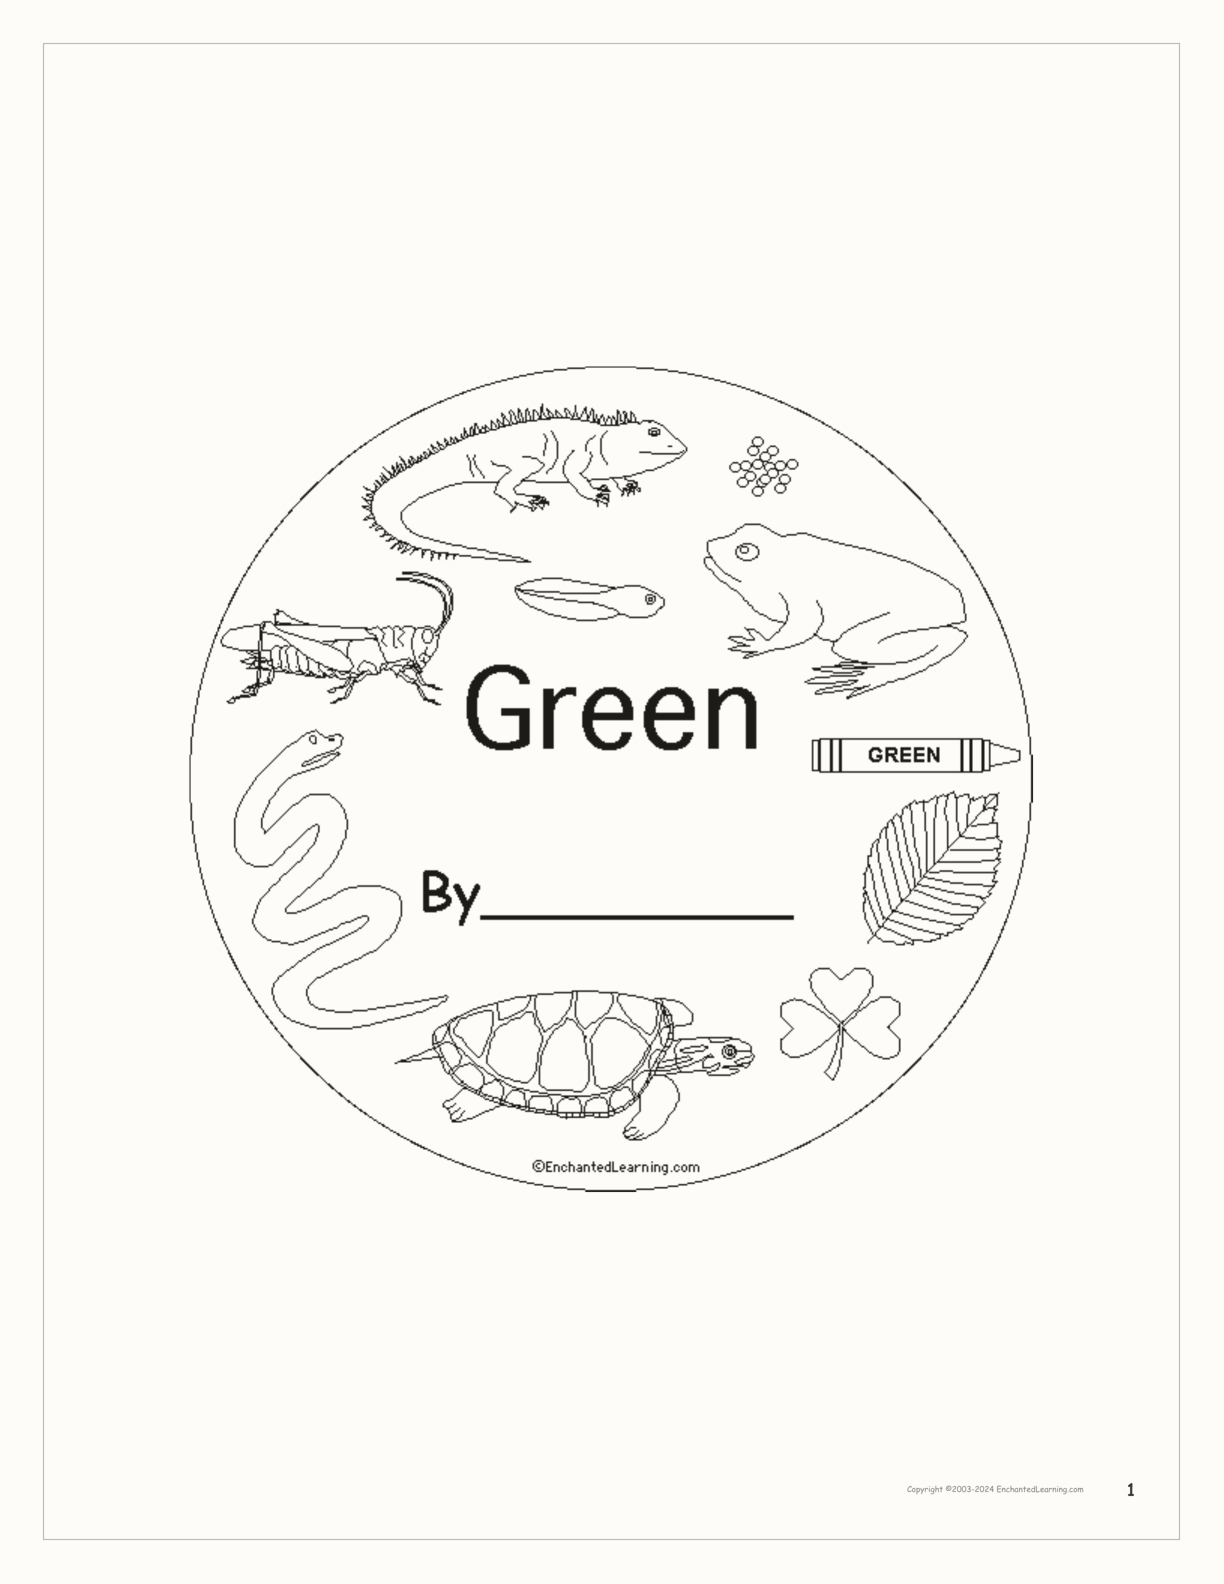 Green Things: Printable Color Book interactive worksheet page 1